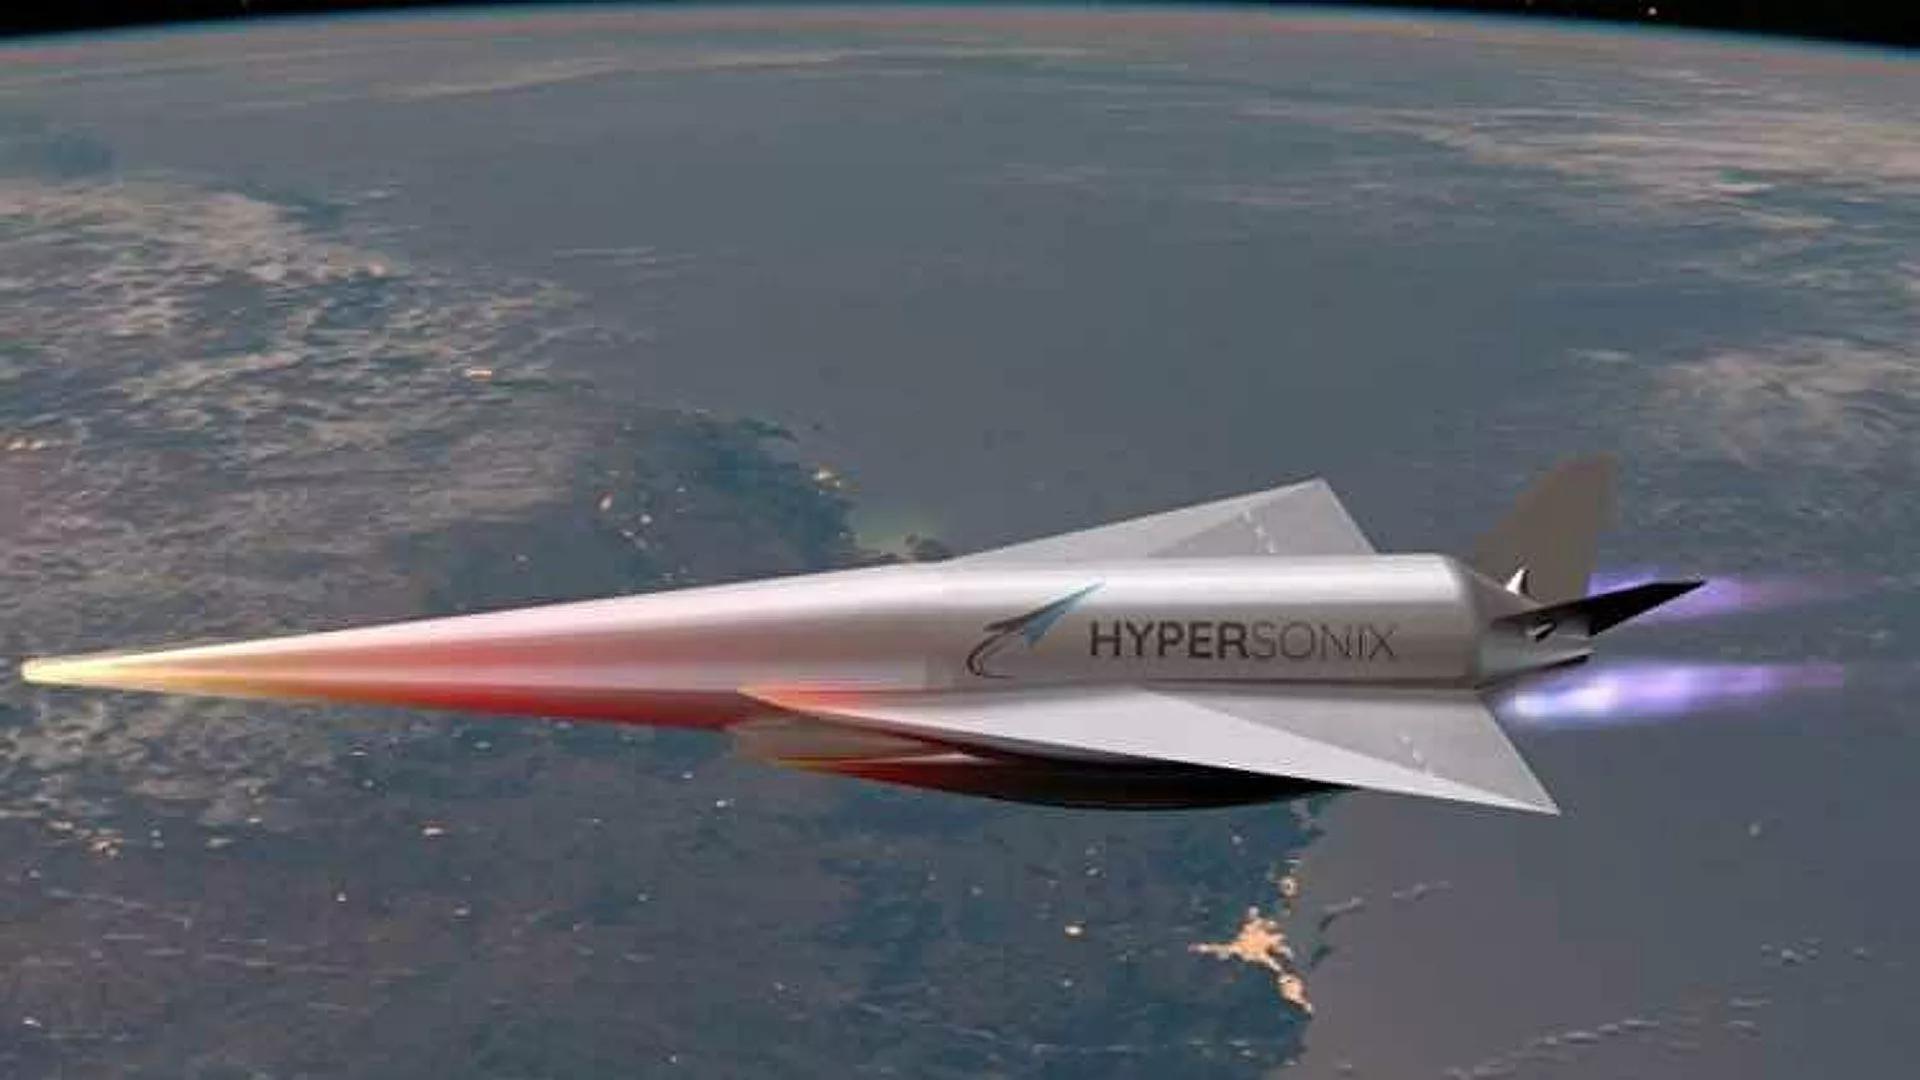 Australian Start-up to Build World's First Hypersonic 'Spaceplane' Using 3D Printers